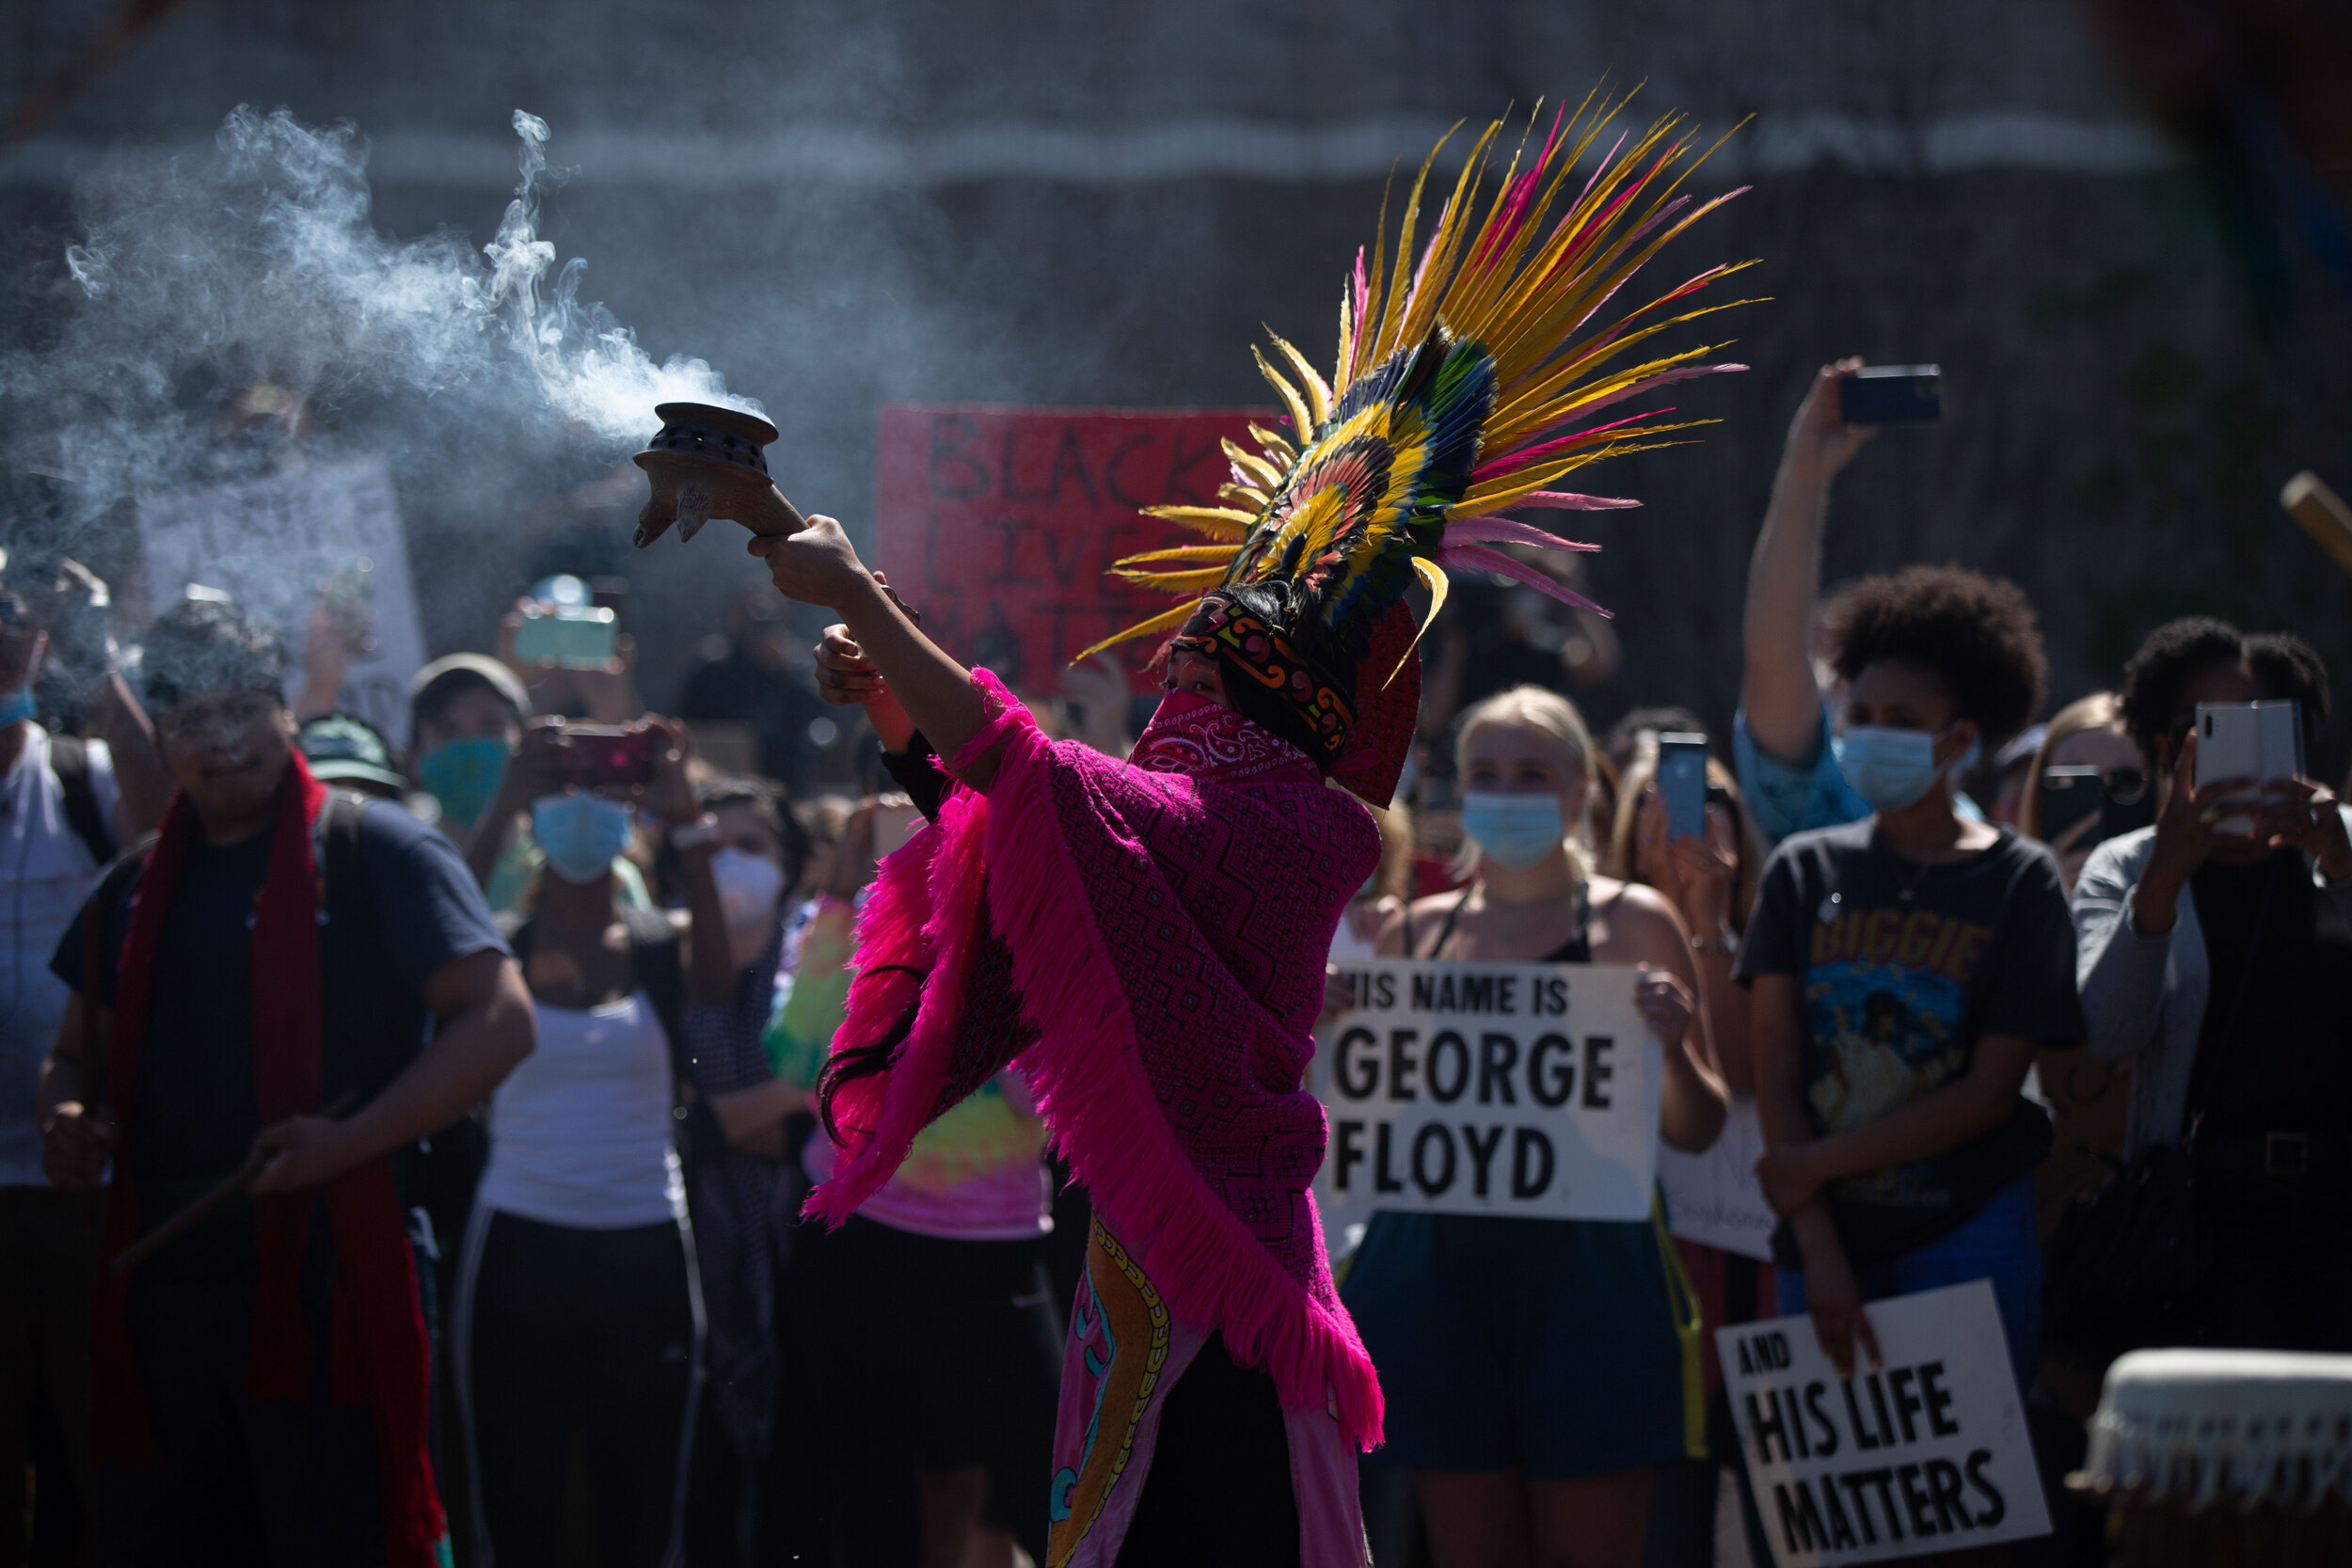  An Aztec dancer burns sage during a protest over the police killing of George Floyd in Minneapolis, Minnesota on May 30, 2020. Chris Juhn/Zuma. 